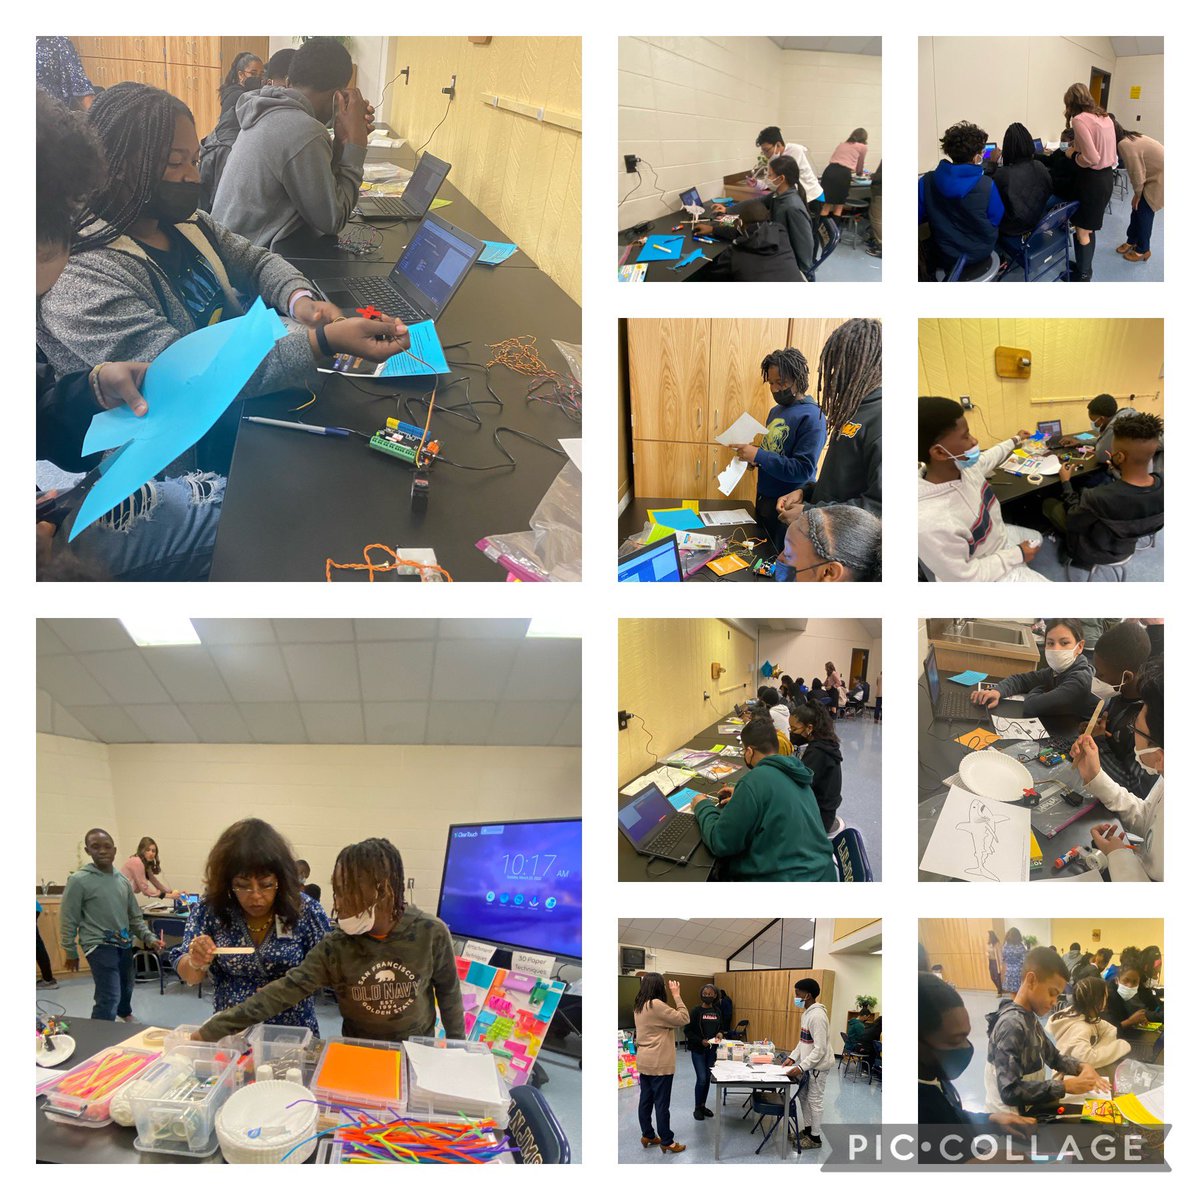 Students attended a STEM event today during Students@Work month which exposes students to careers that our CTE teachers promote!@mmcmillenCDC @CumberlandCoSch #Careerawareness